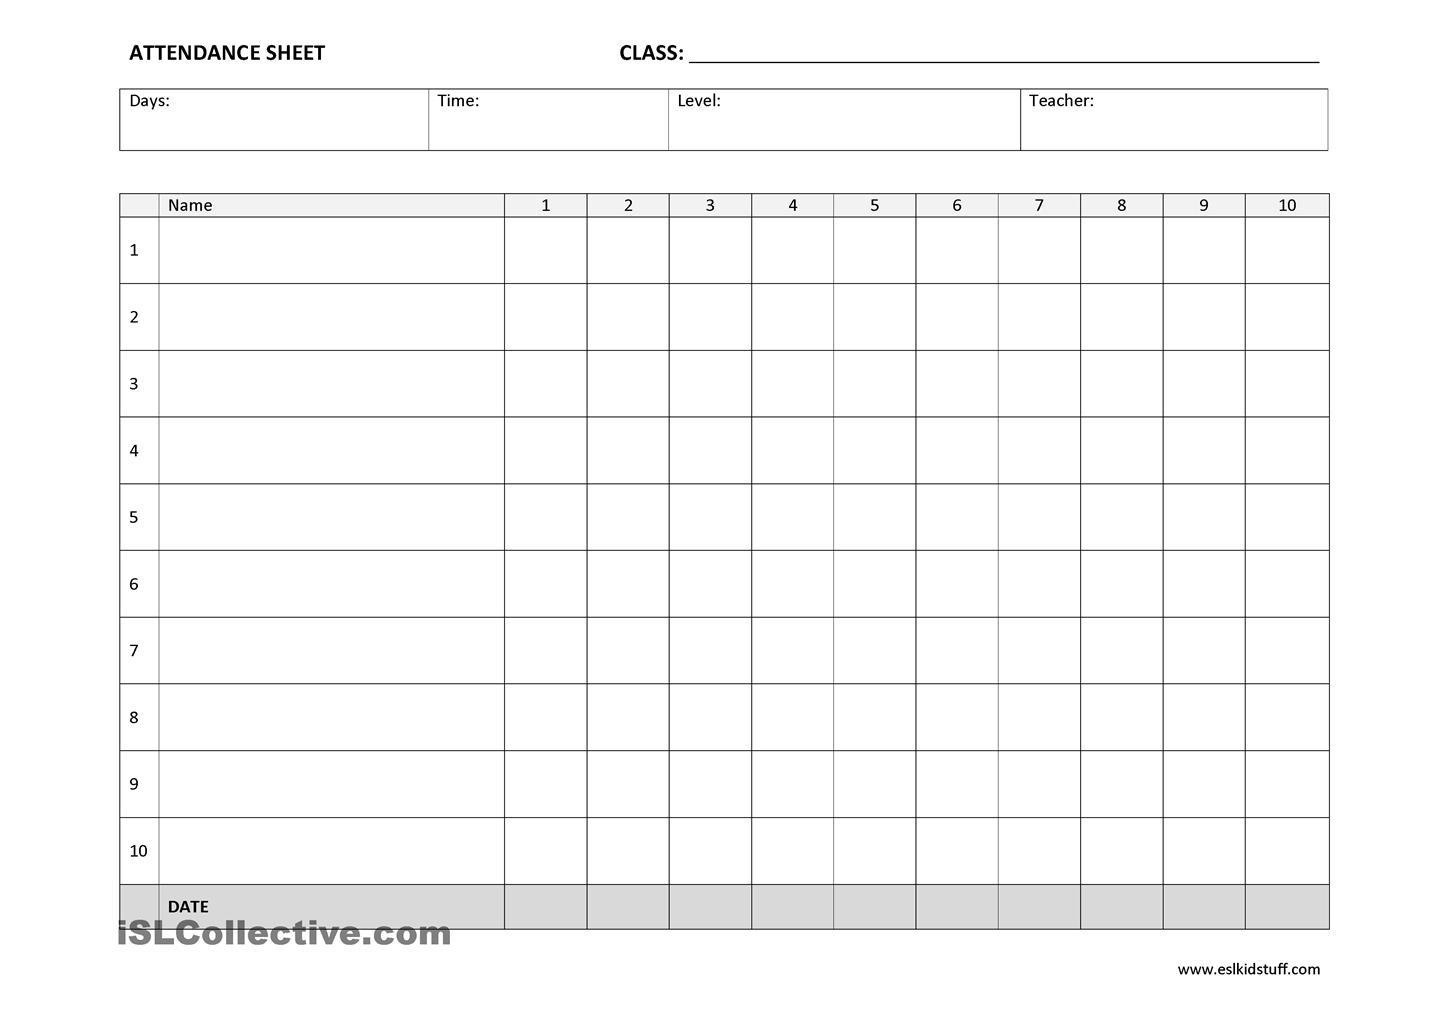 church-attendance-tracking-spreadsheet-for-25-printable-attendance-sheet-templates-excel